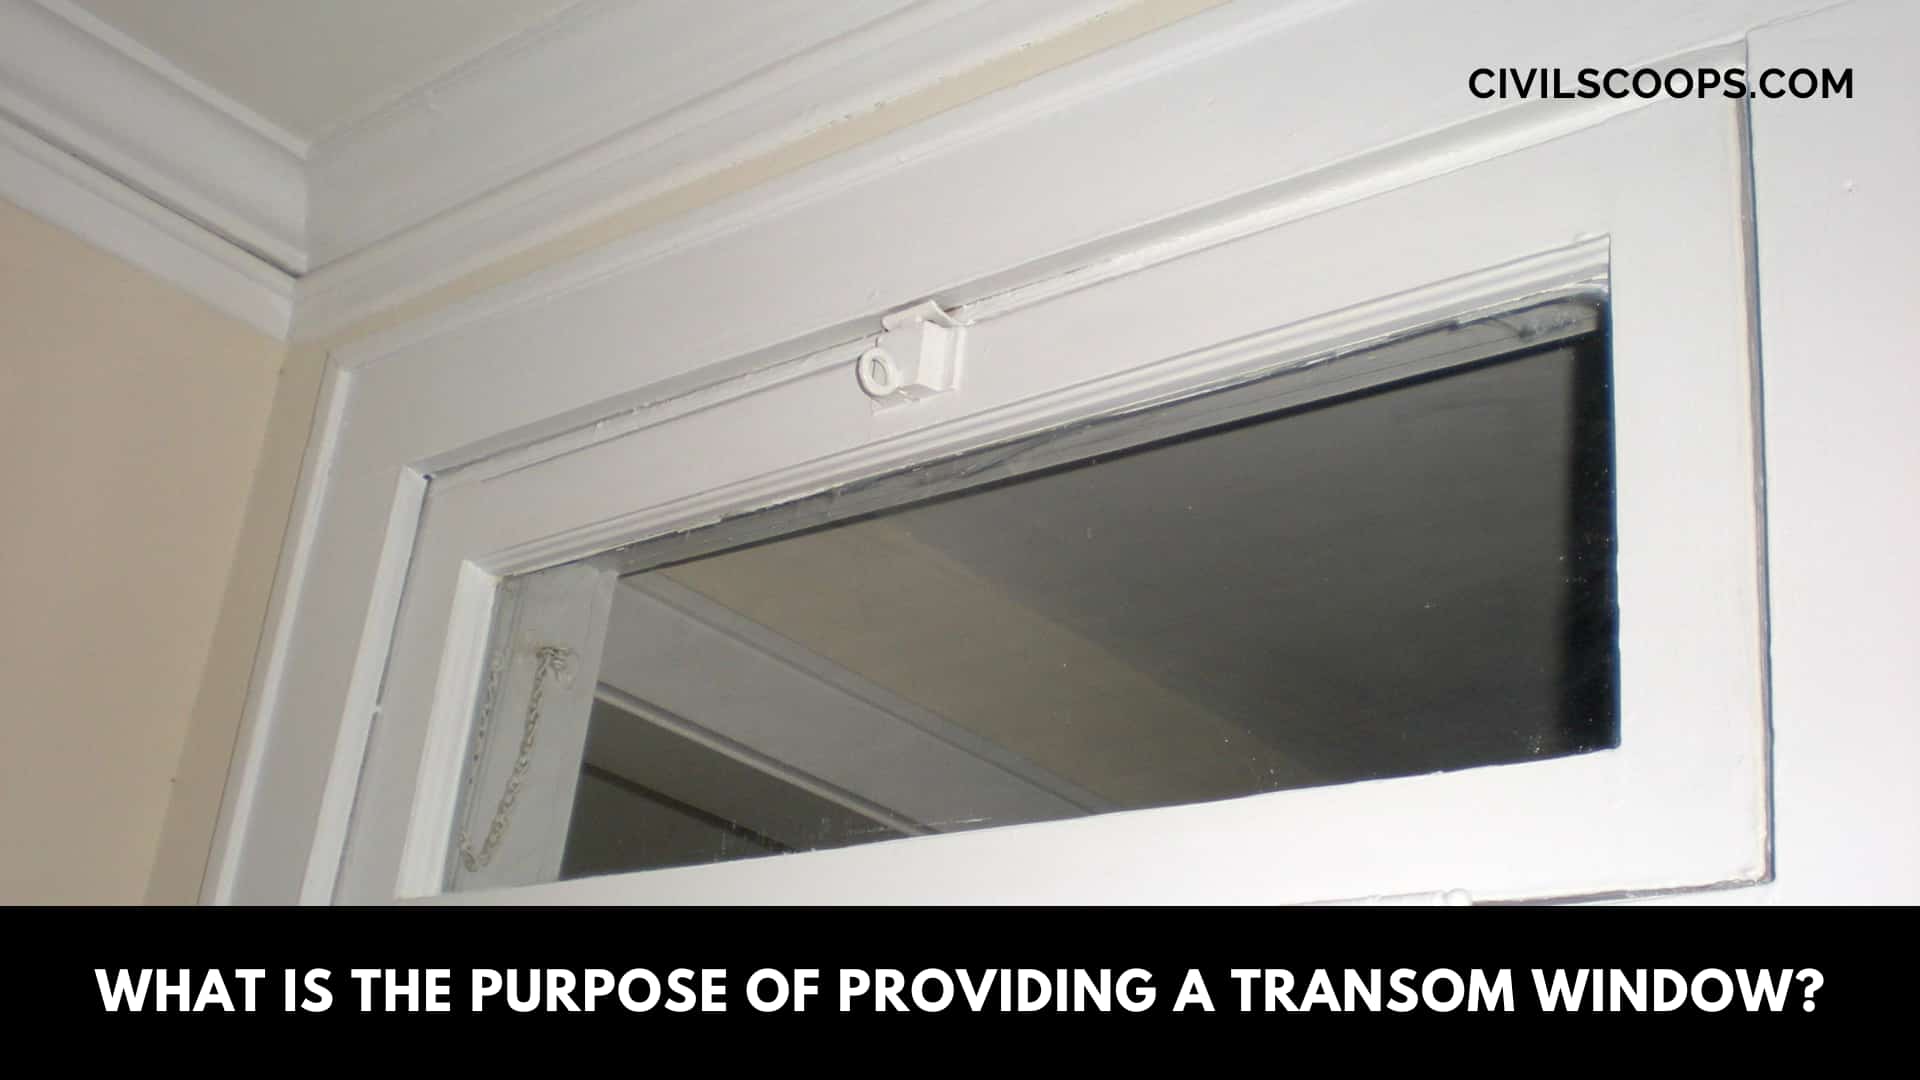 What Is the Purpose of Providing a Transom Window?